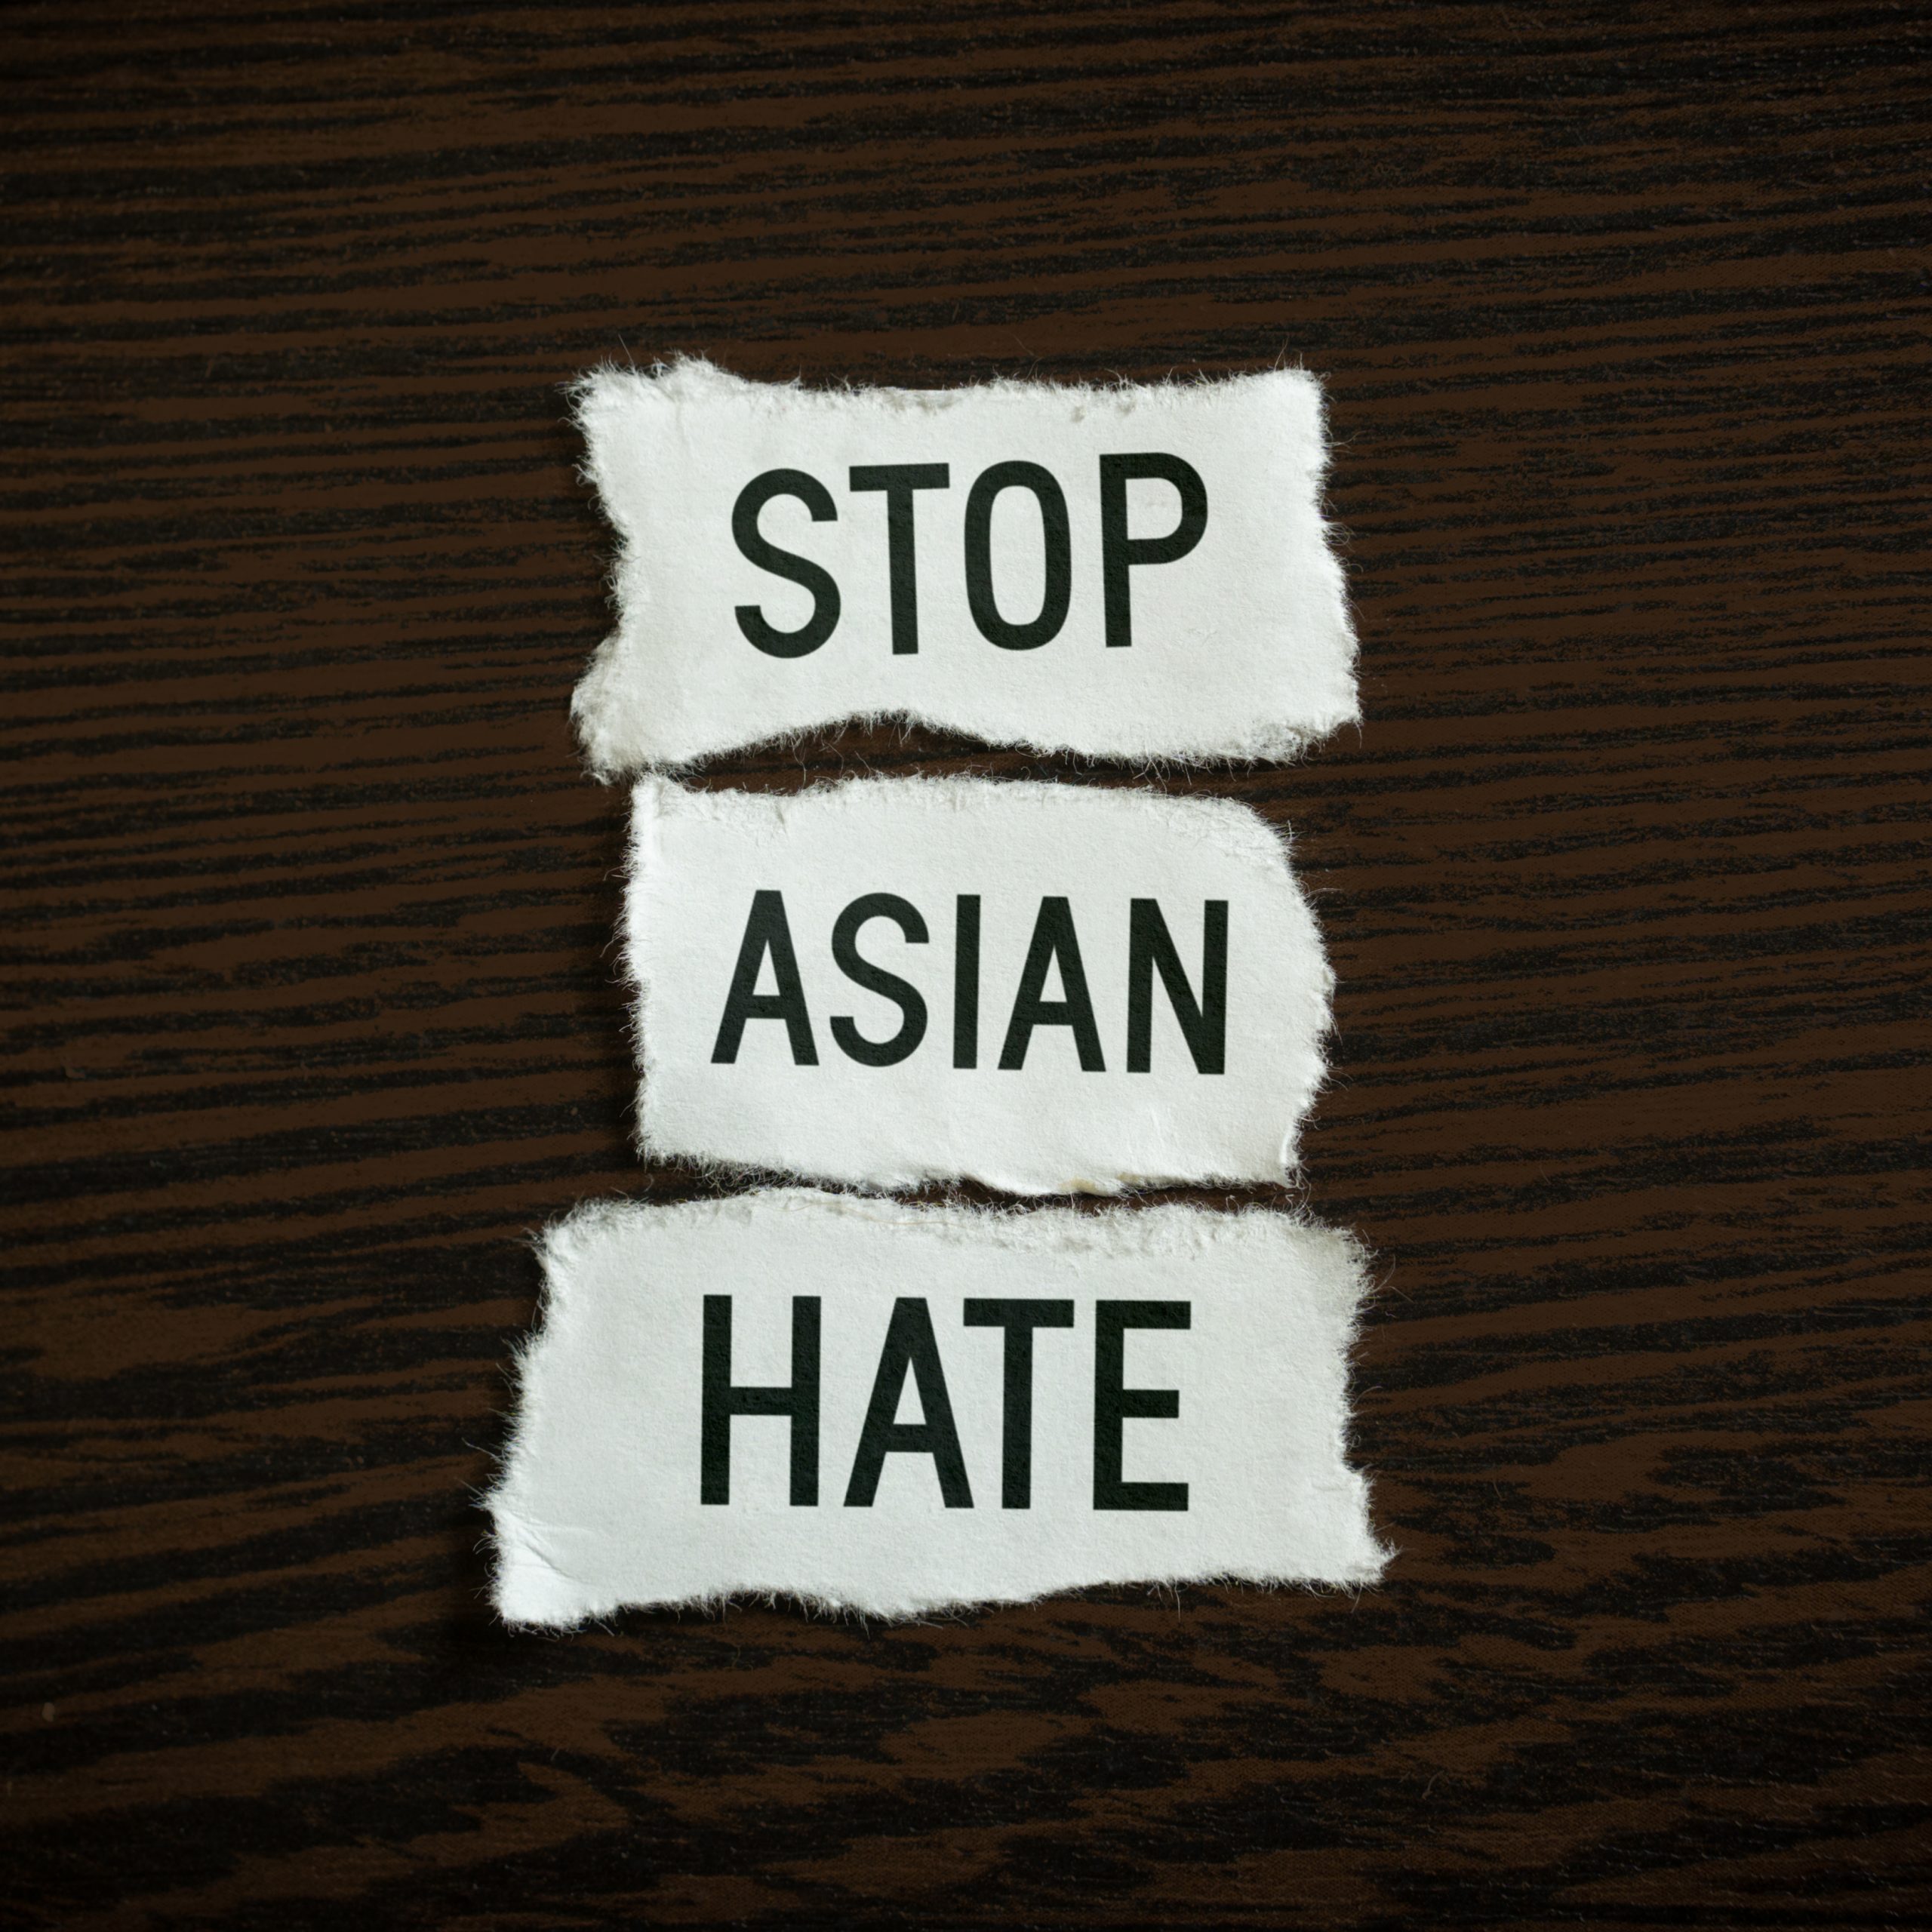 Stop Asian Hate image photo